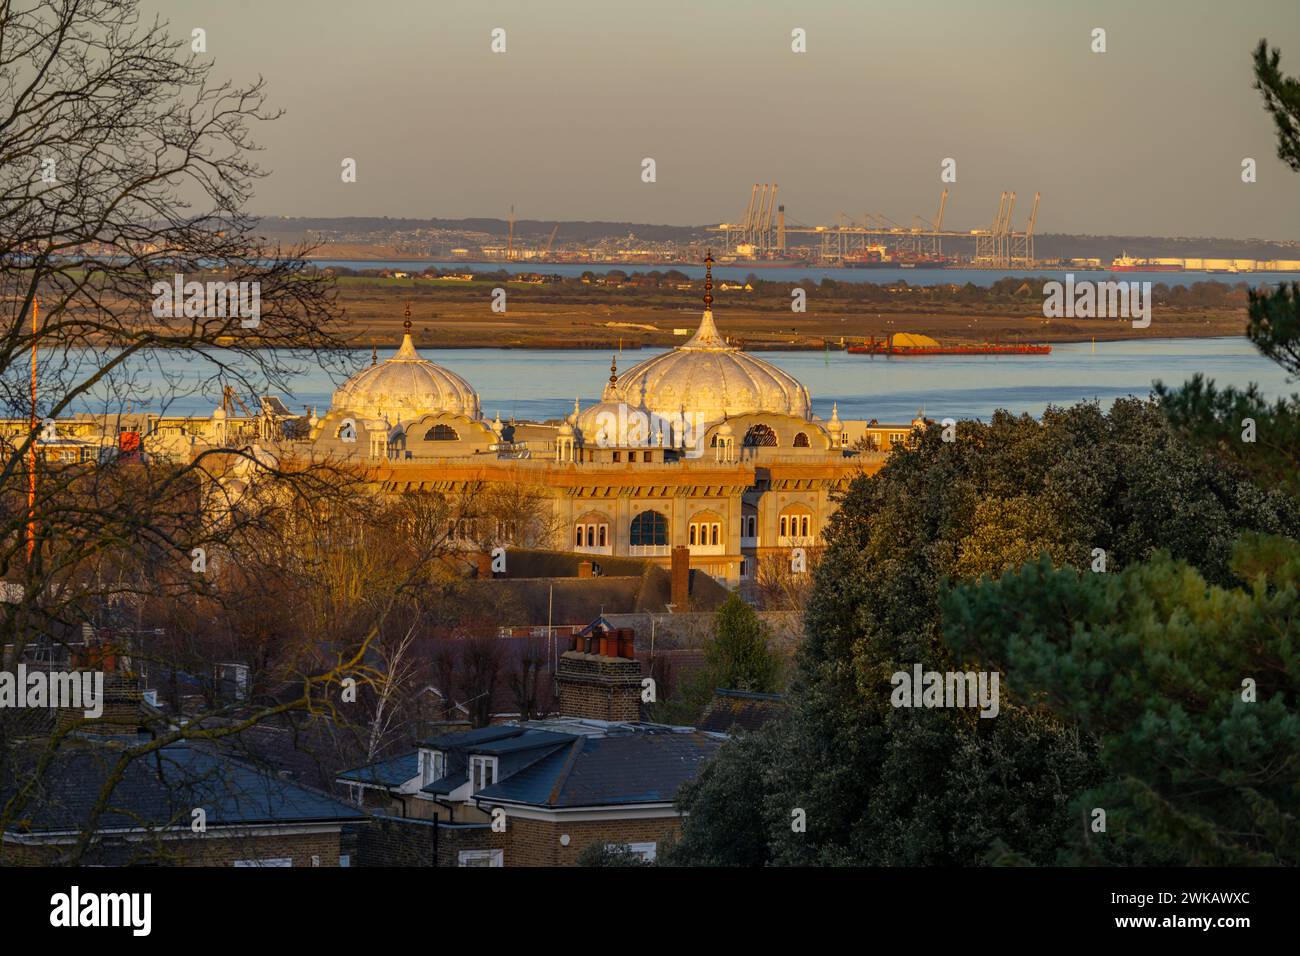 Looking towards London Gateway Port at Coryton. With the domes of the Gravesend Gurdwara in the foreground. From Windmill hill at Sunset. Stock Photo